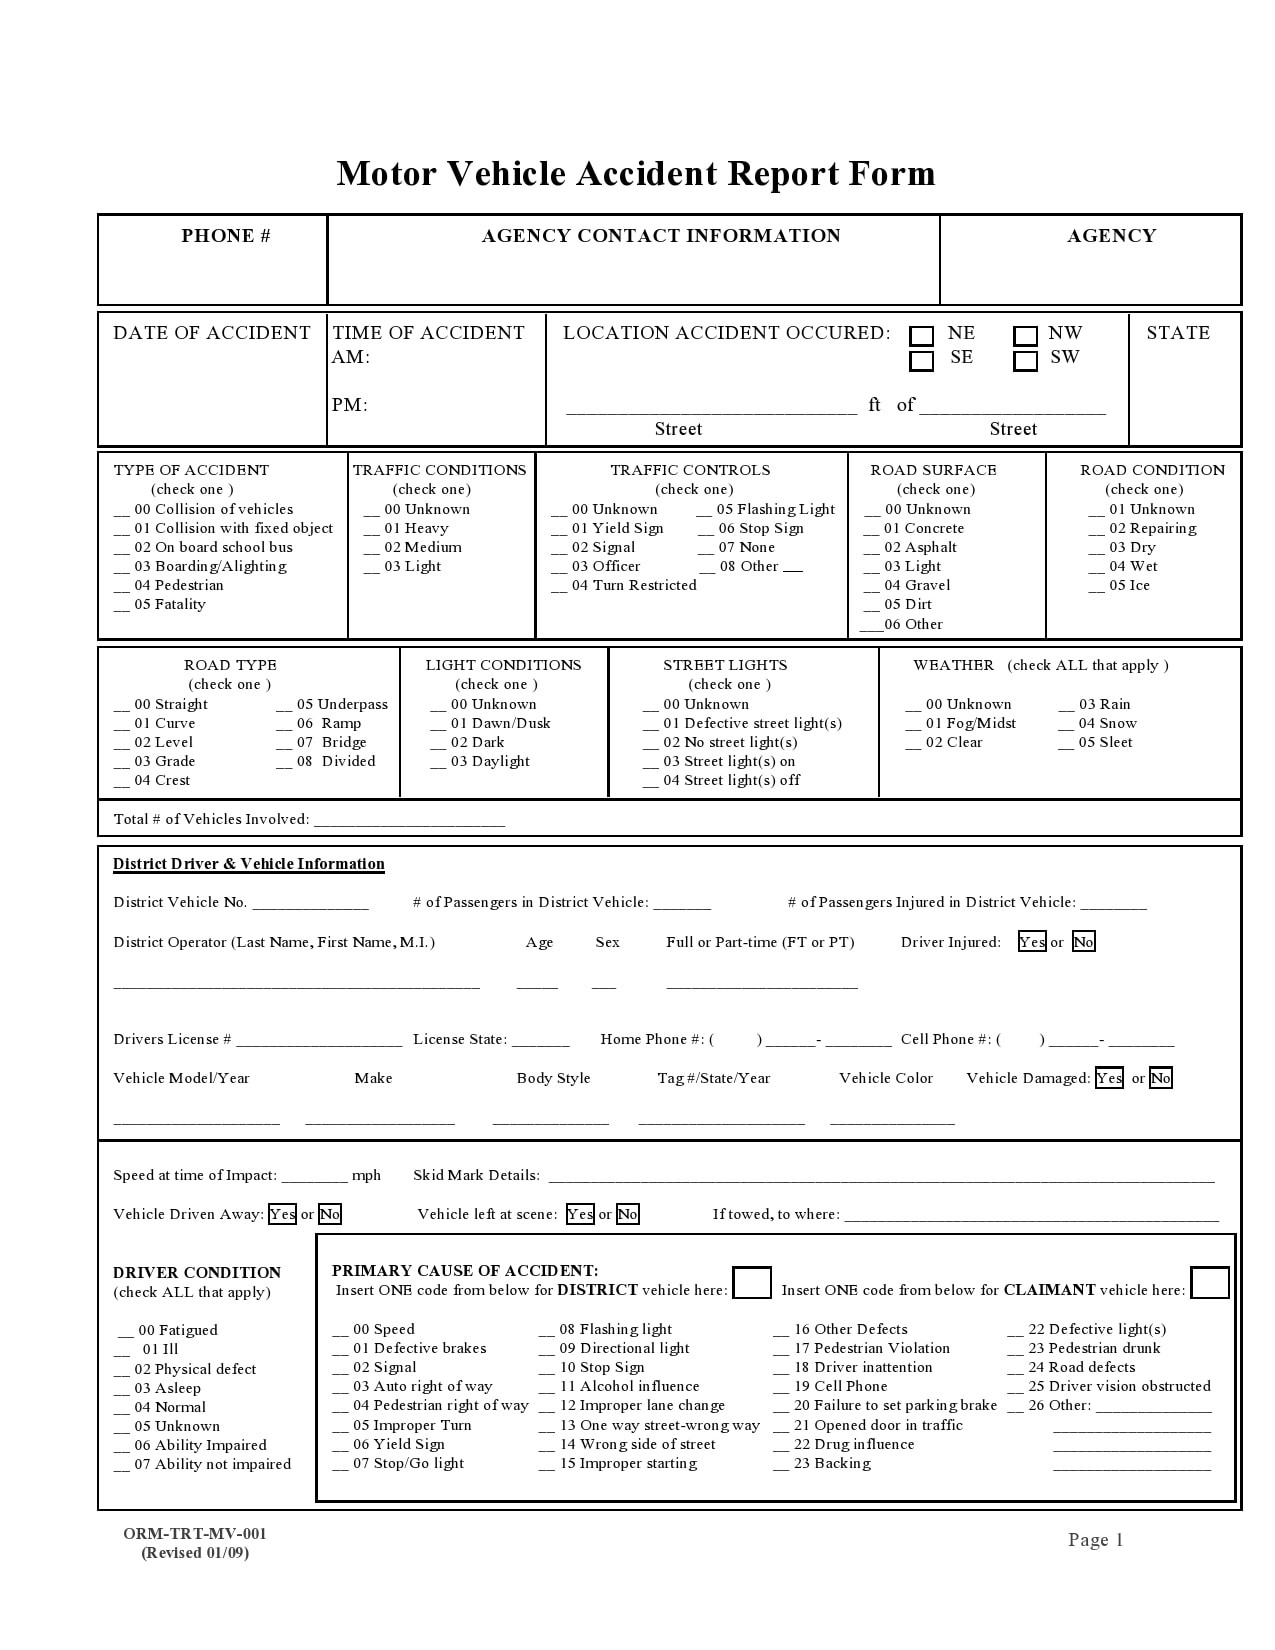 Motor Vehicle Accident Report Form Template from templatearchive.com